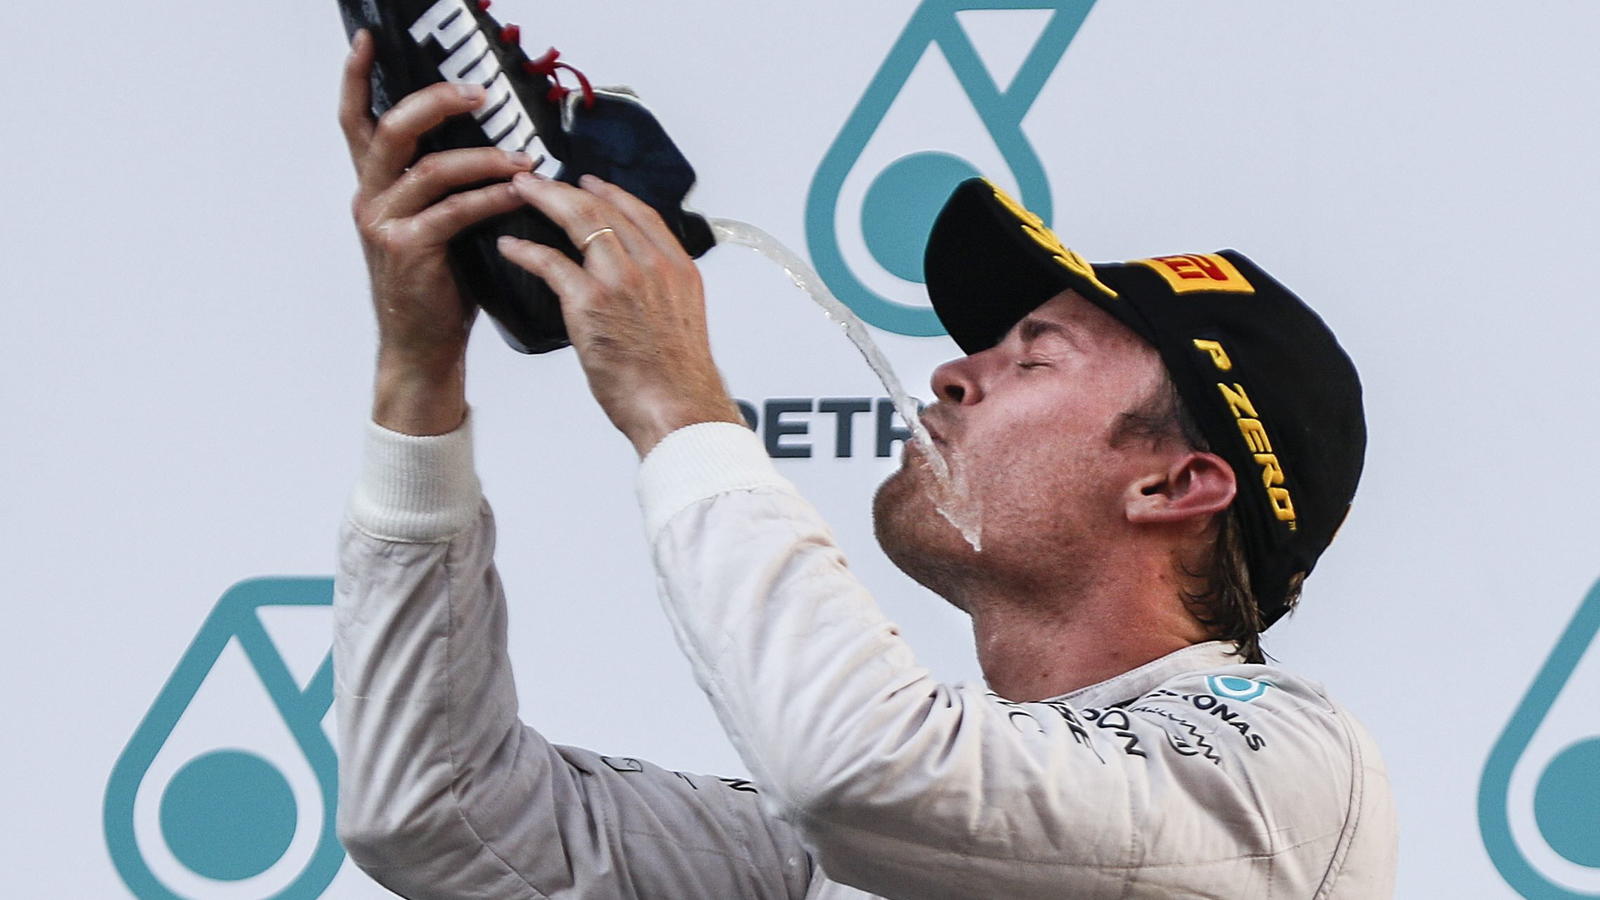 epa05566182 Third placed German Formula One driver Nico Rosberg of Mercedes AMG GP drinks champagne out of a boot on the podium of the Malaysian Formula One Grand Prix in Sepang, Malaysia, 02 October 2016. EPA/AHMAD YUSNI +++(c) dpa - Bildfunk+++